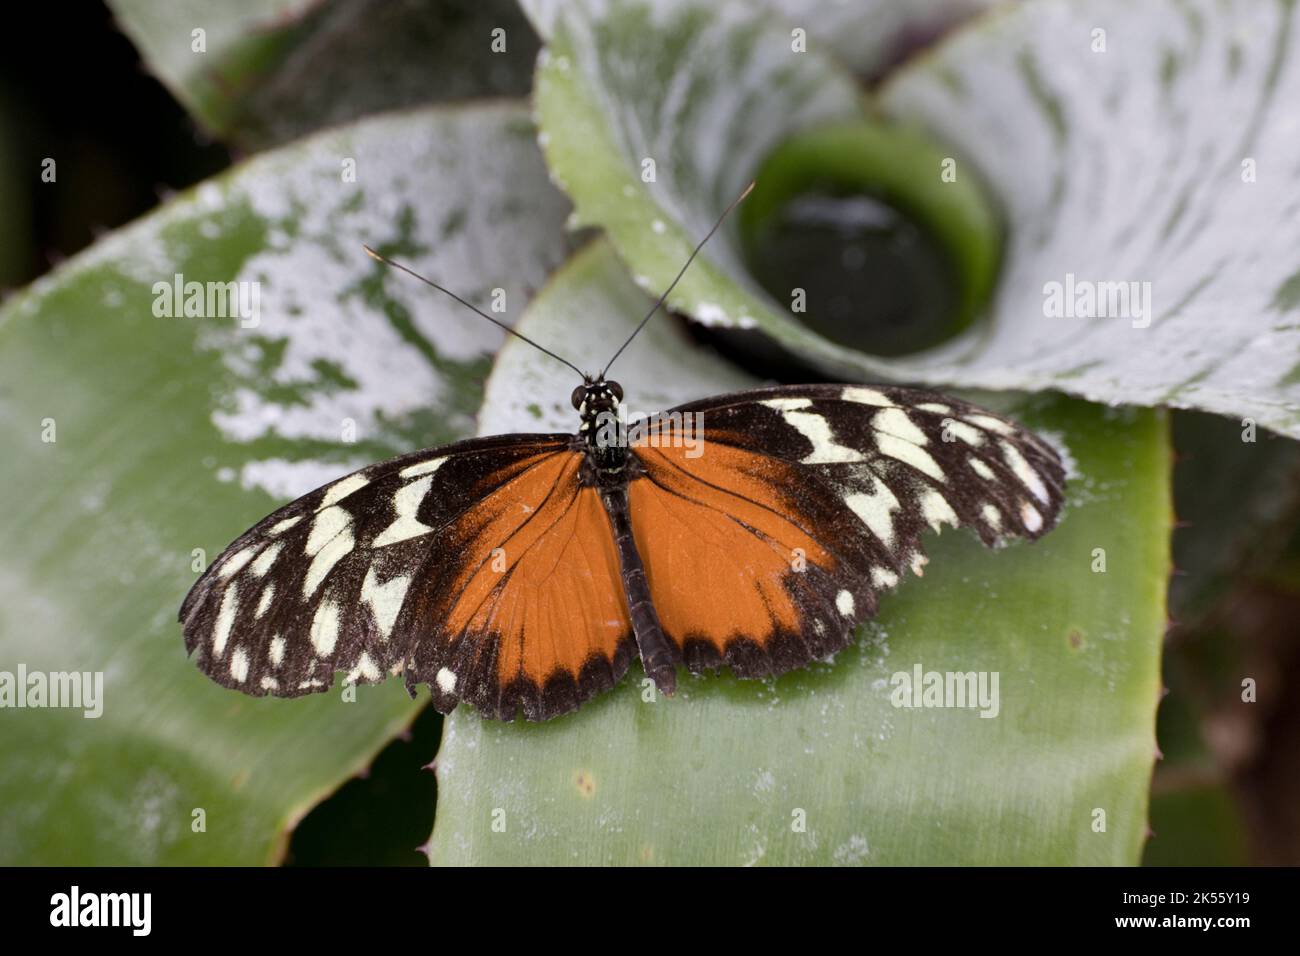 One Cream-spotted tigerwing butterfly Tithorea tarricina resting with wings open Stratford on Avon Butterfly Farm UK Stock Photo